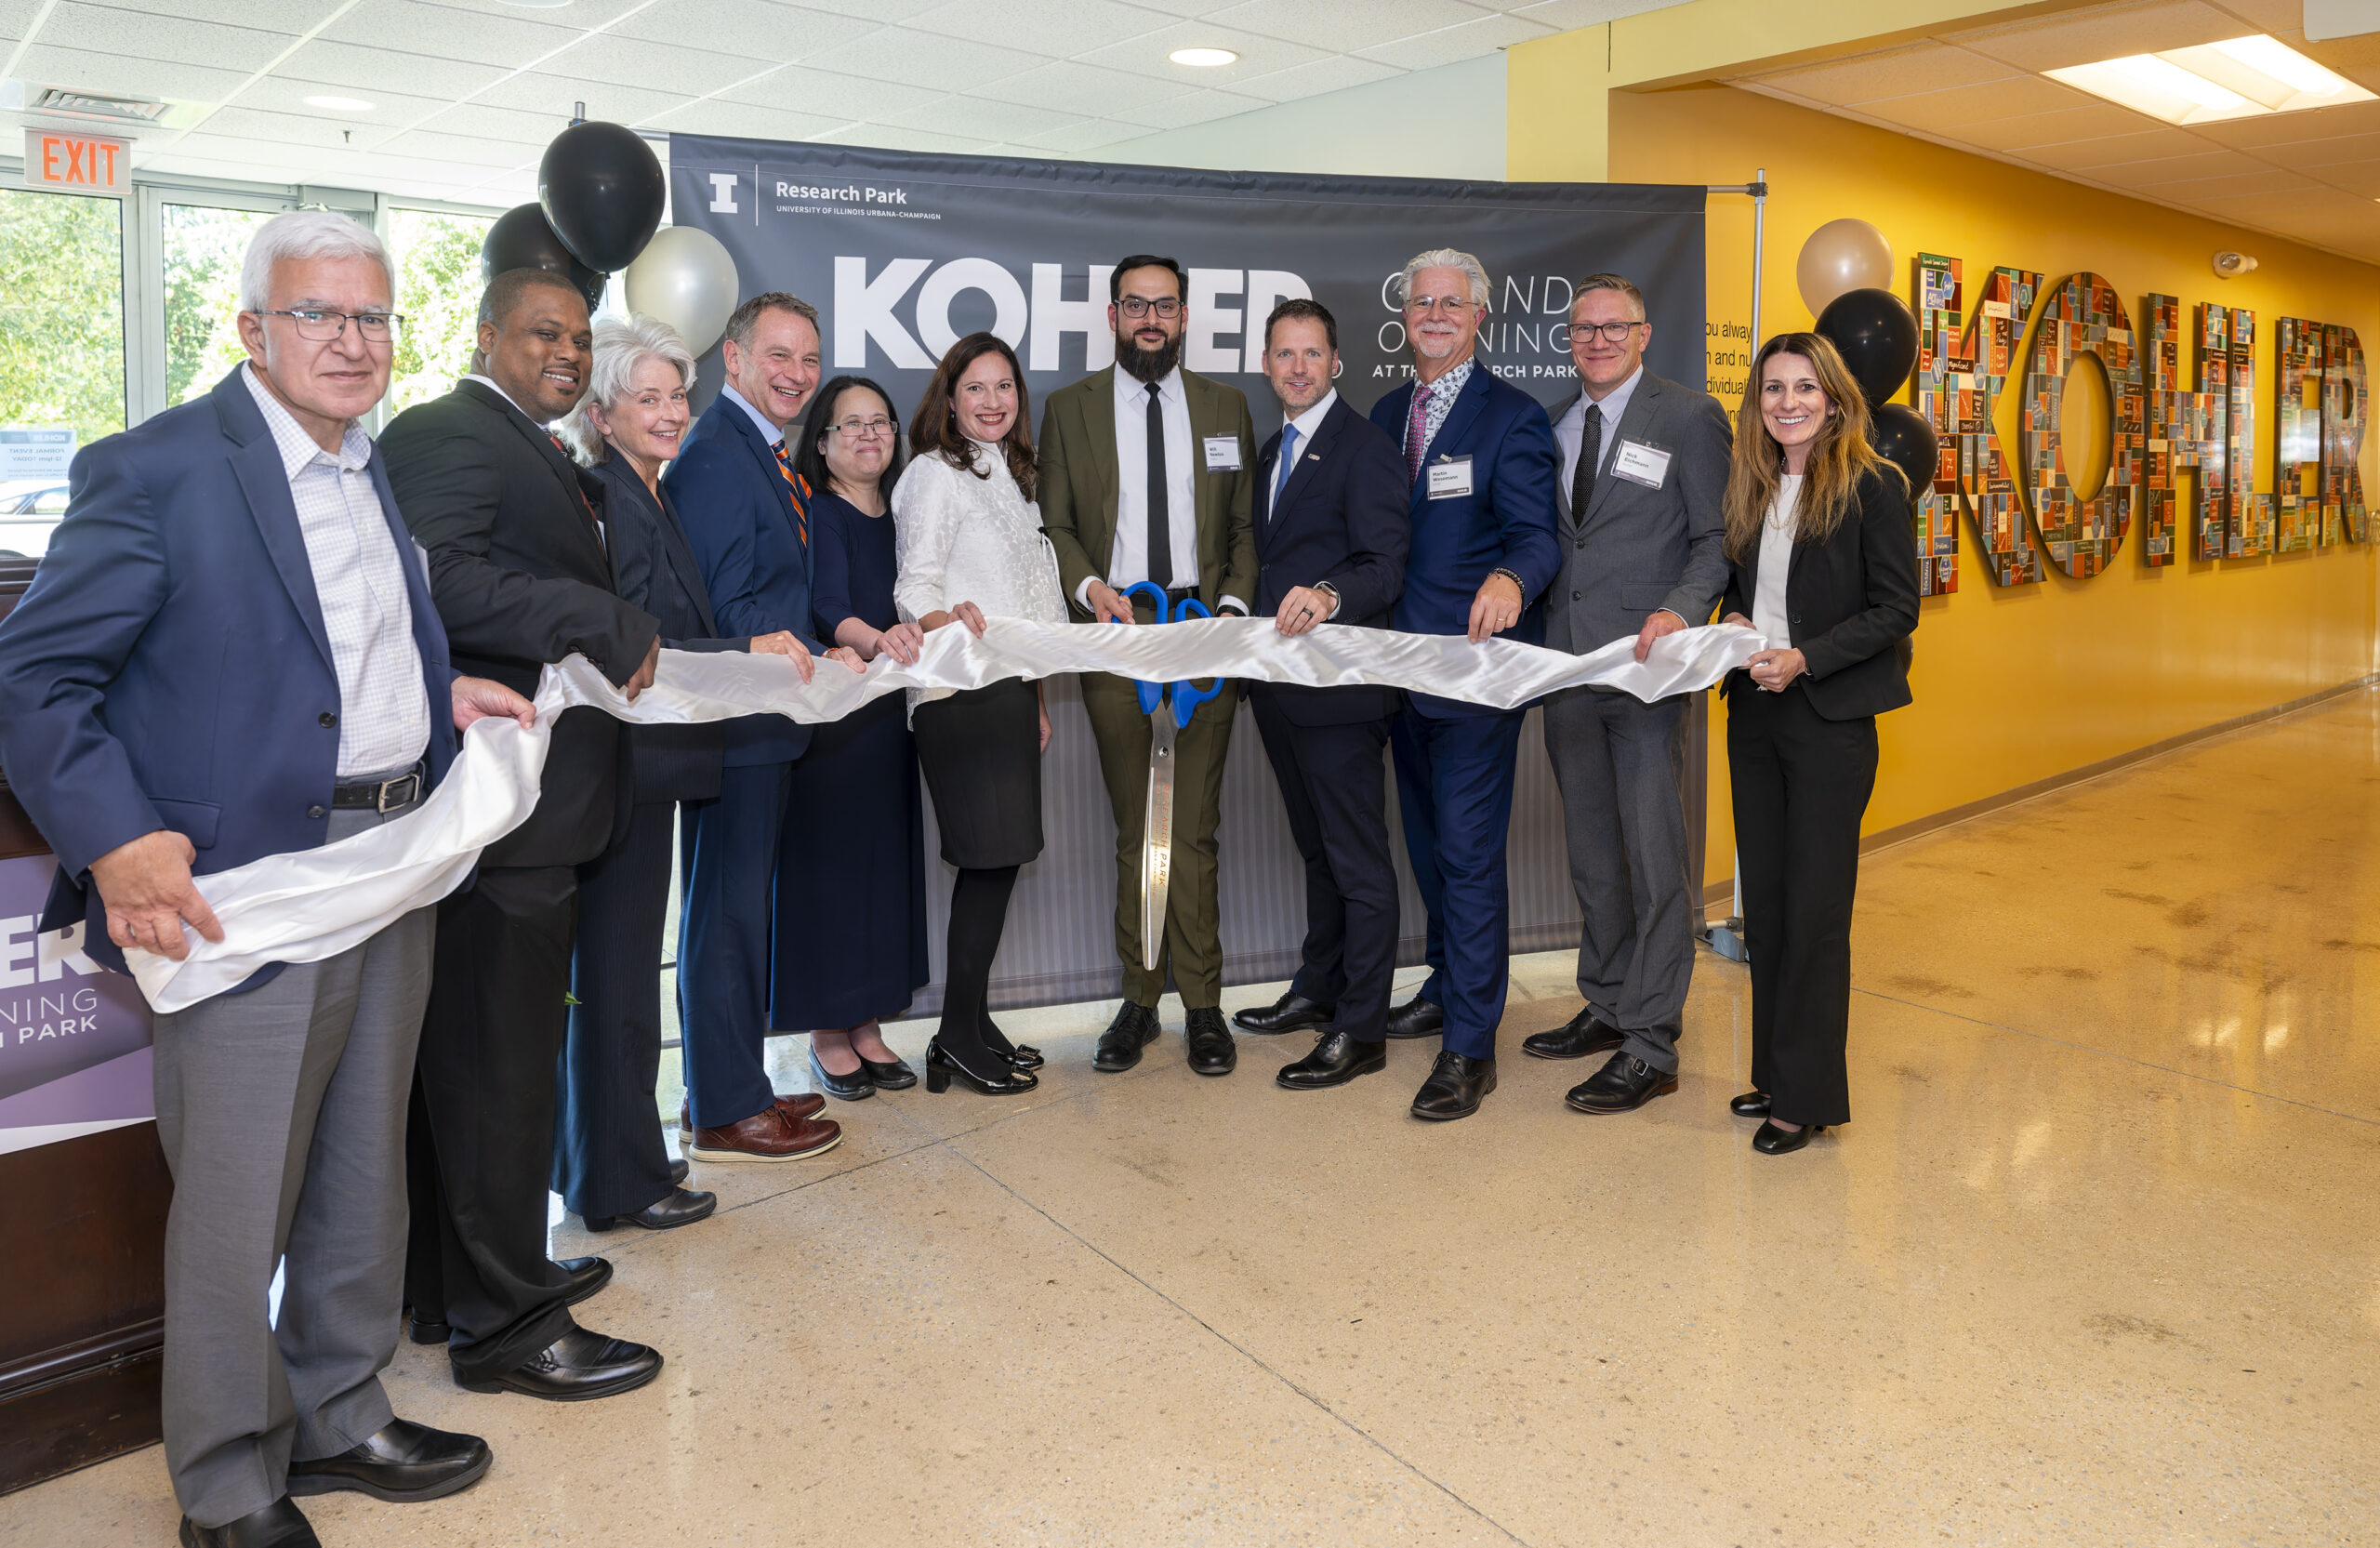 Representatives from Kohler, The University of Illinois, Research Park, and the state of Illinois pose for the official ribbon cutting for the Kohler Innovation Center.